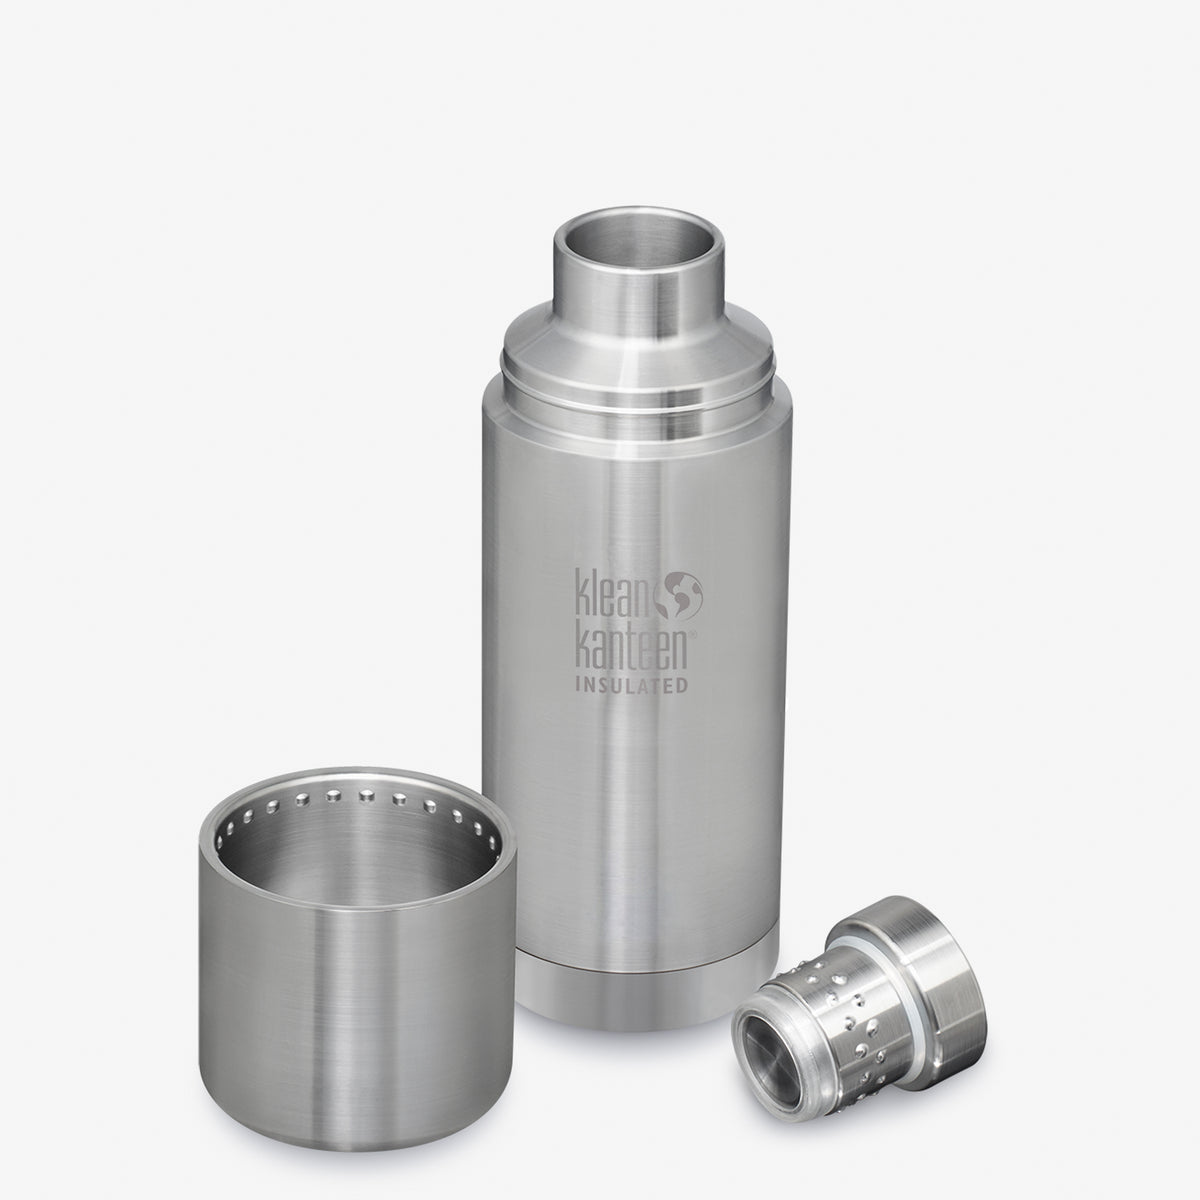 Klean Kanteen TKPro water bottle (0.75 liter, brushed stainless) - The Fourth Place